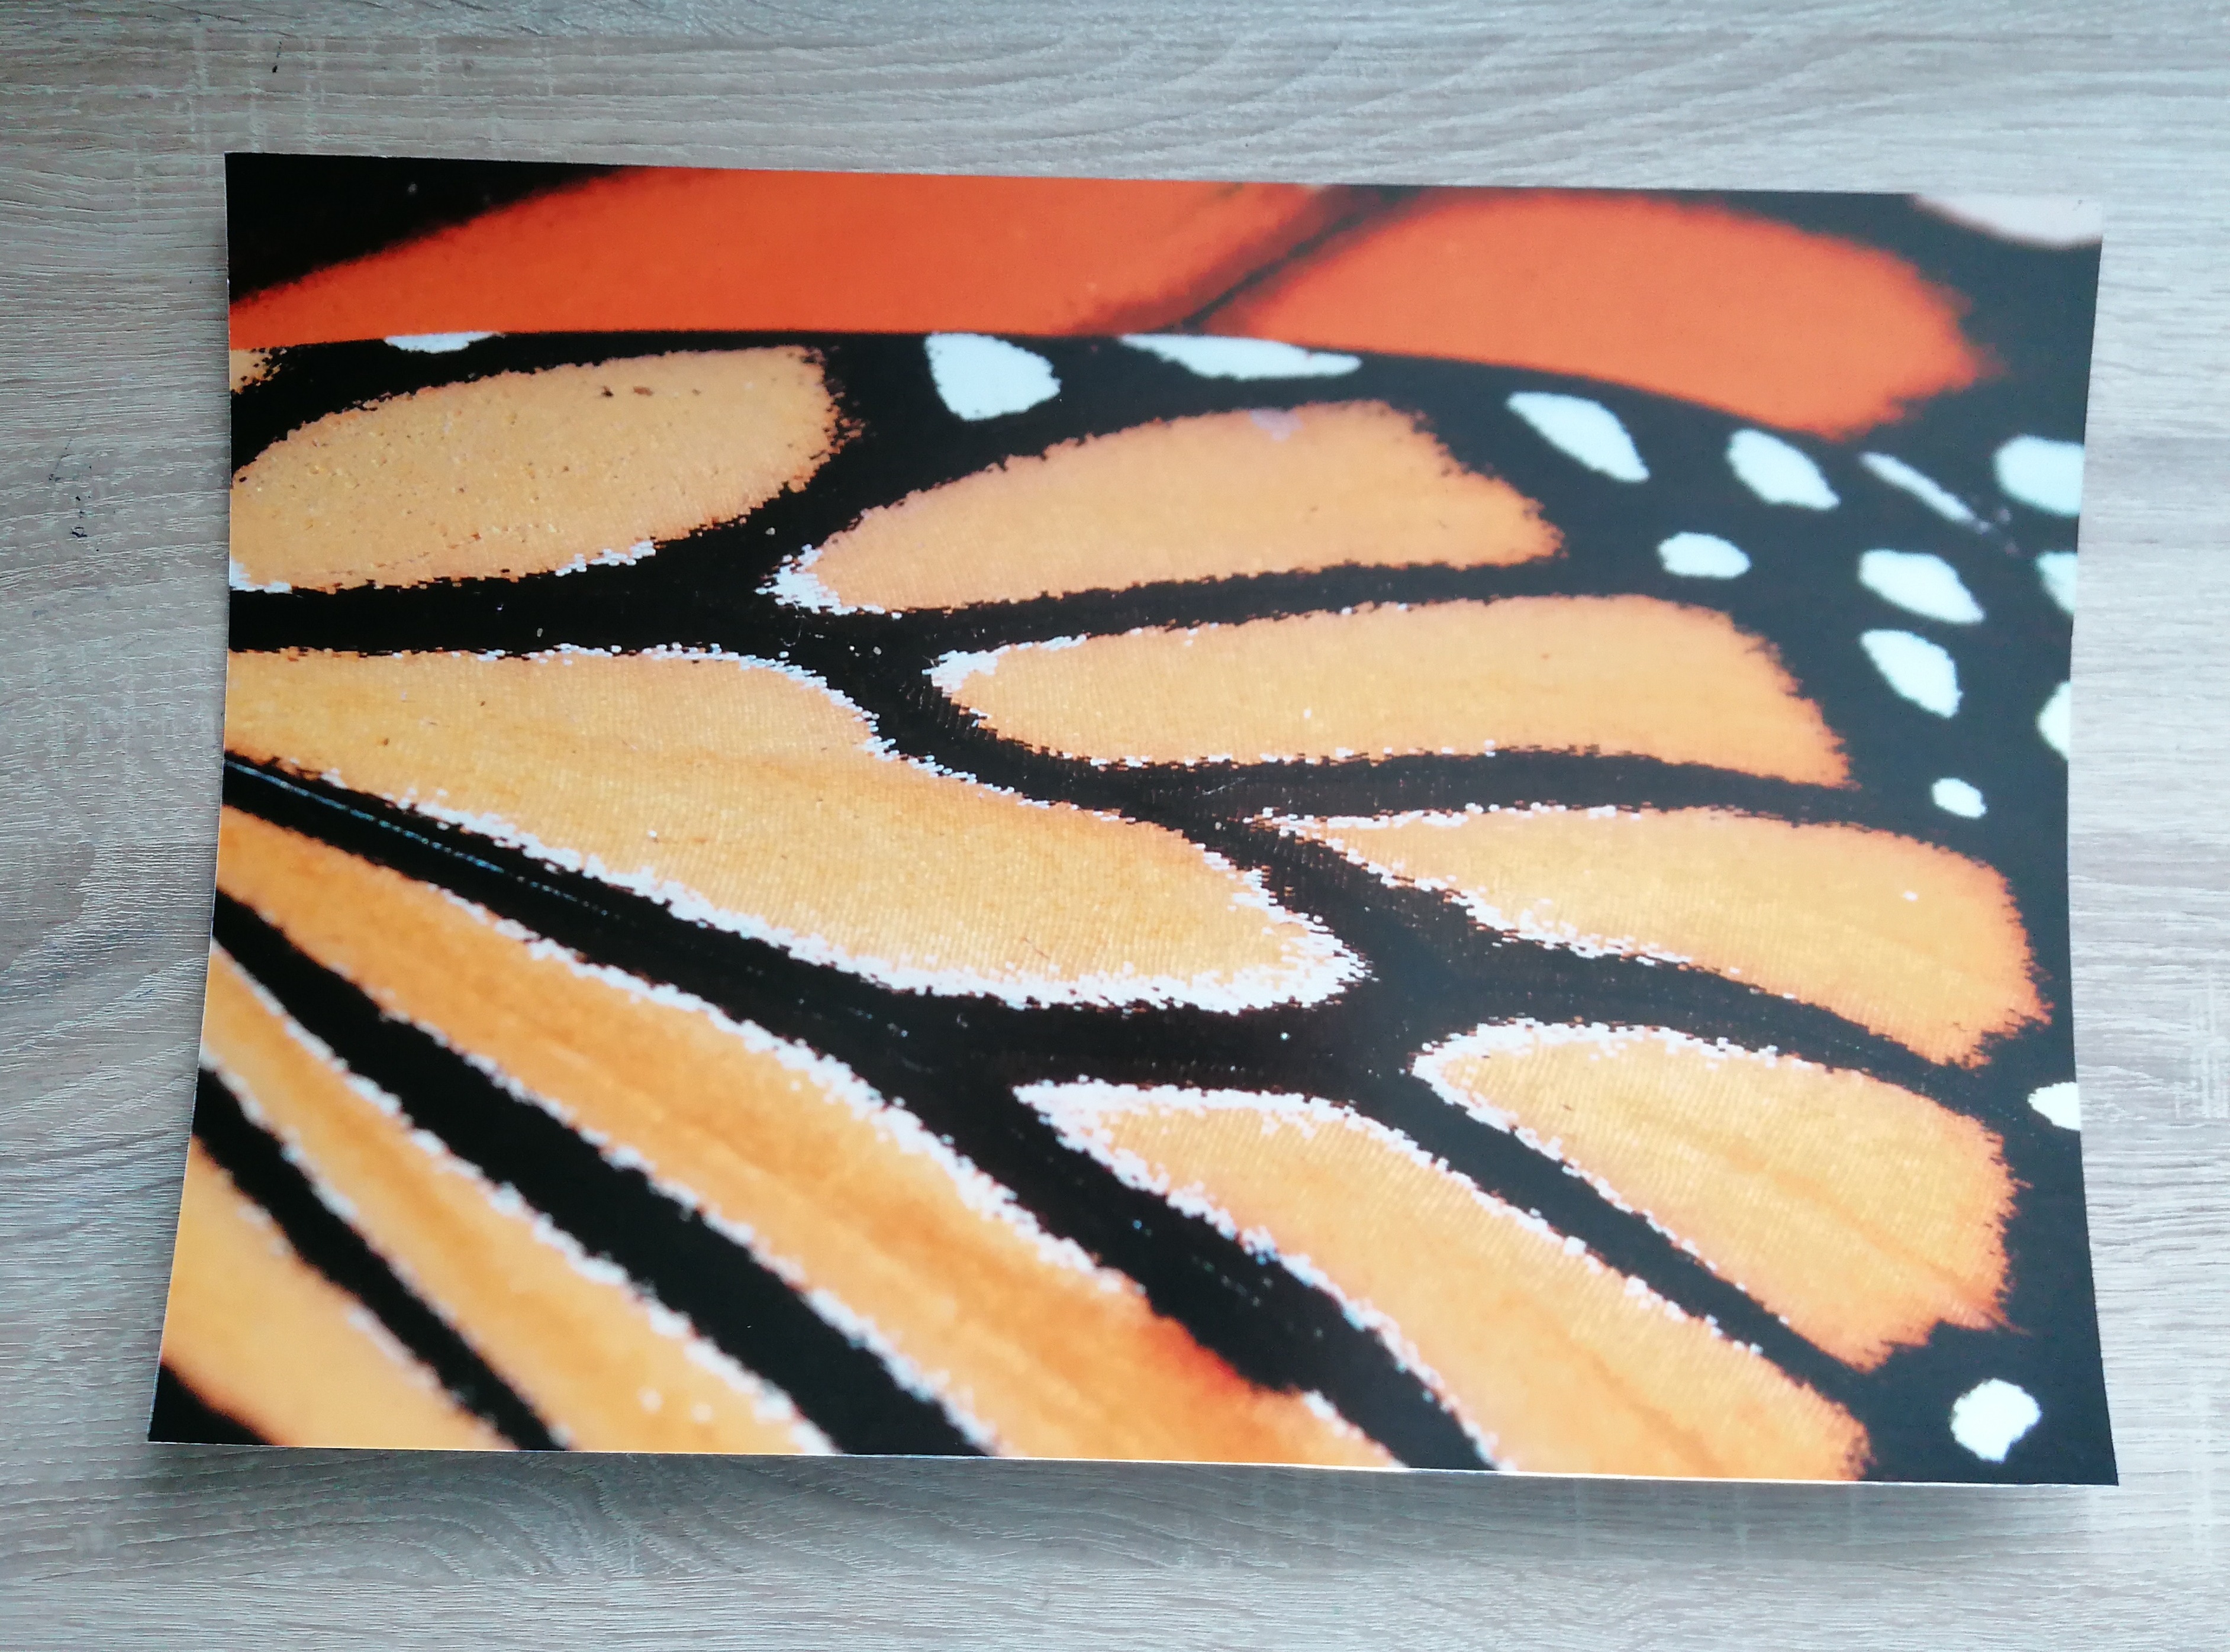 Monarch butterfly wing photo